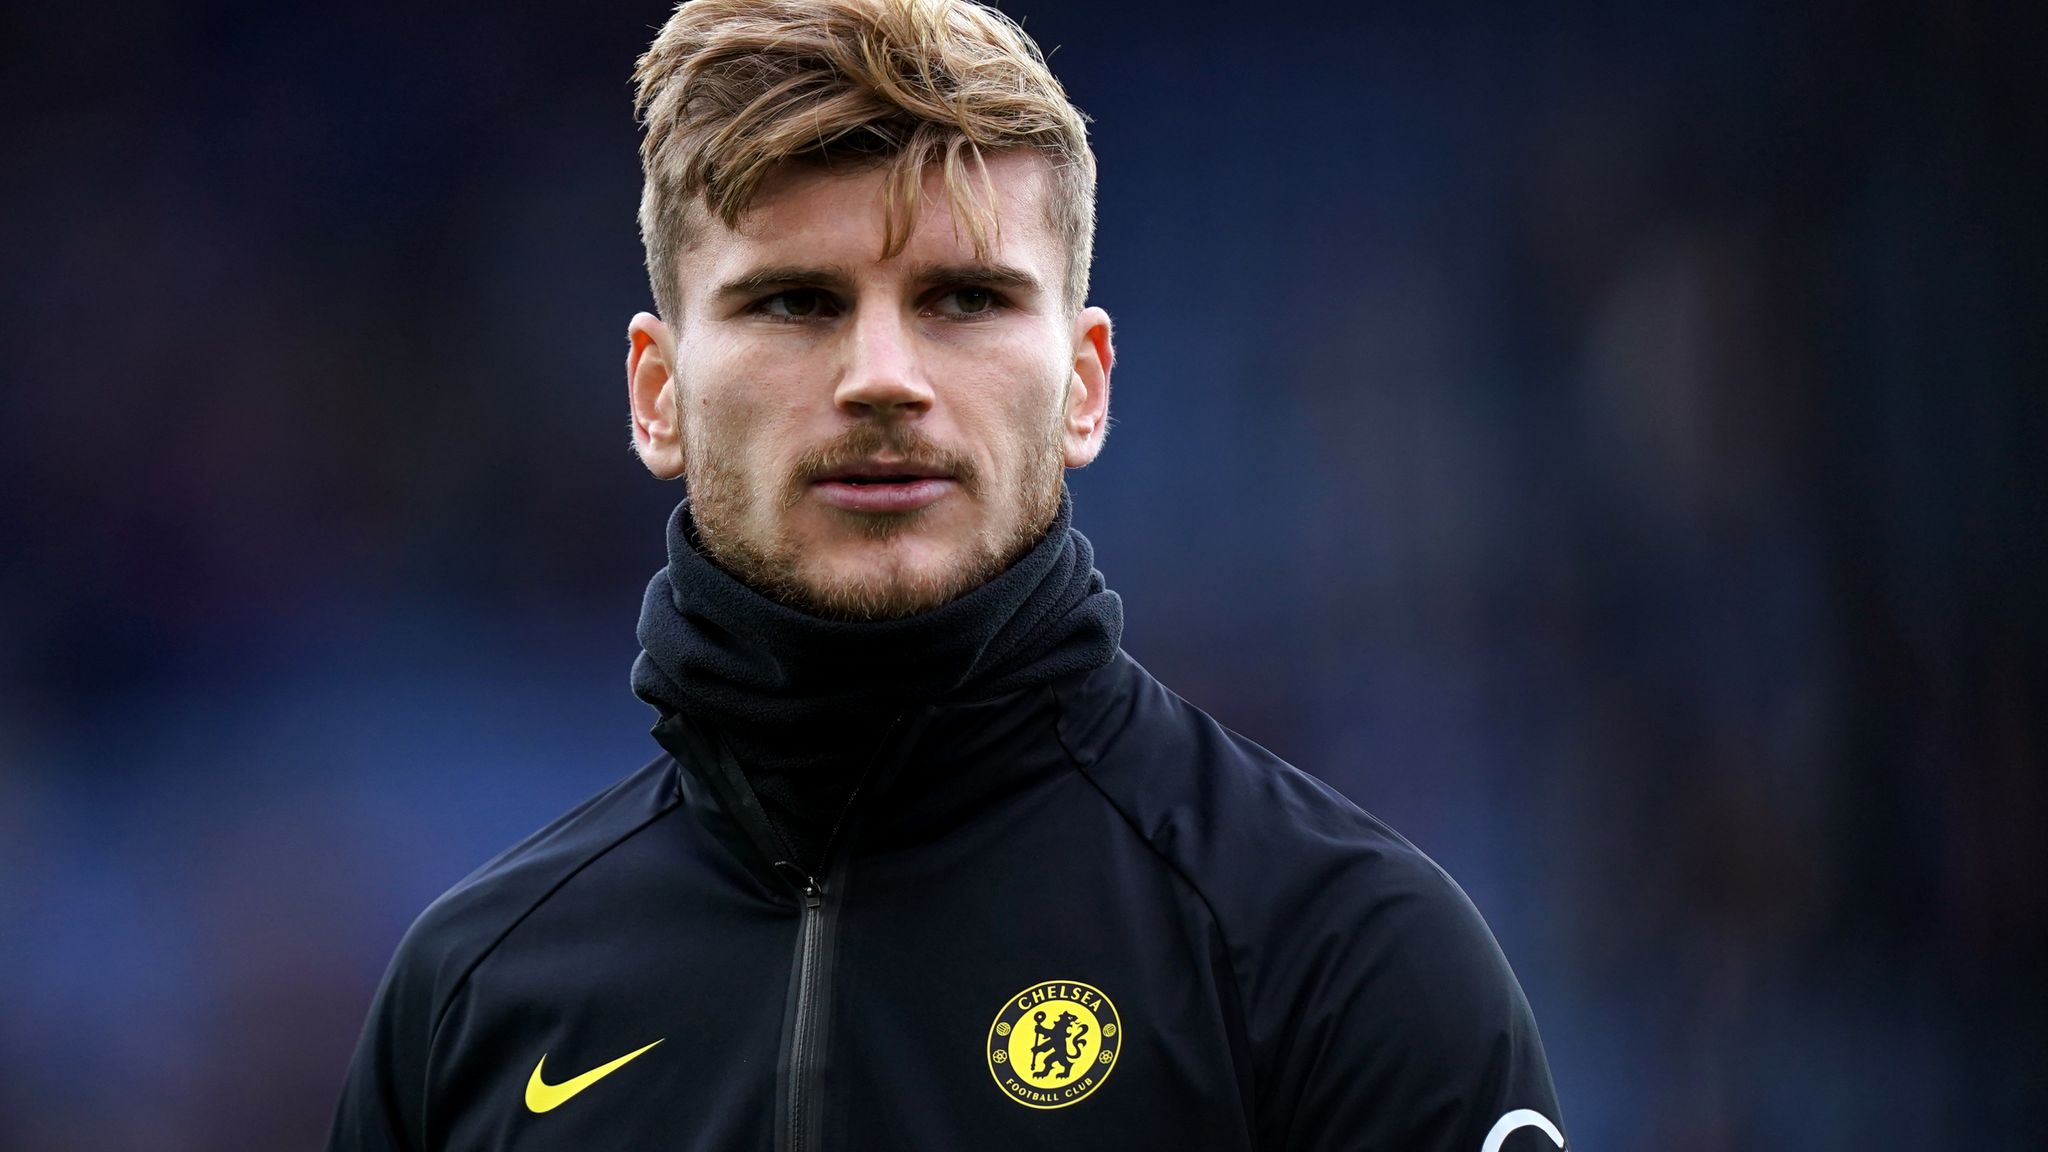 Timo Werner Age, Salary, Net worth, Current Teams, Career, Height, and much more